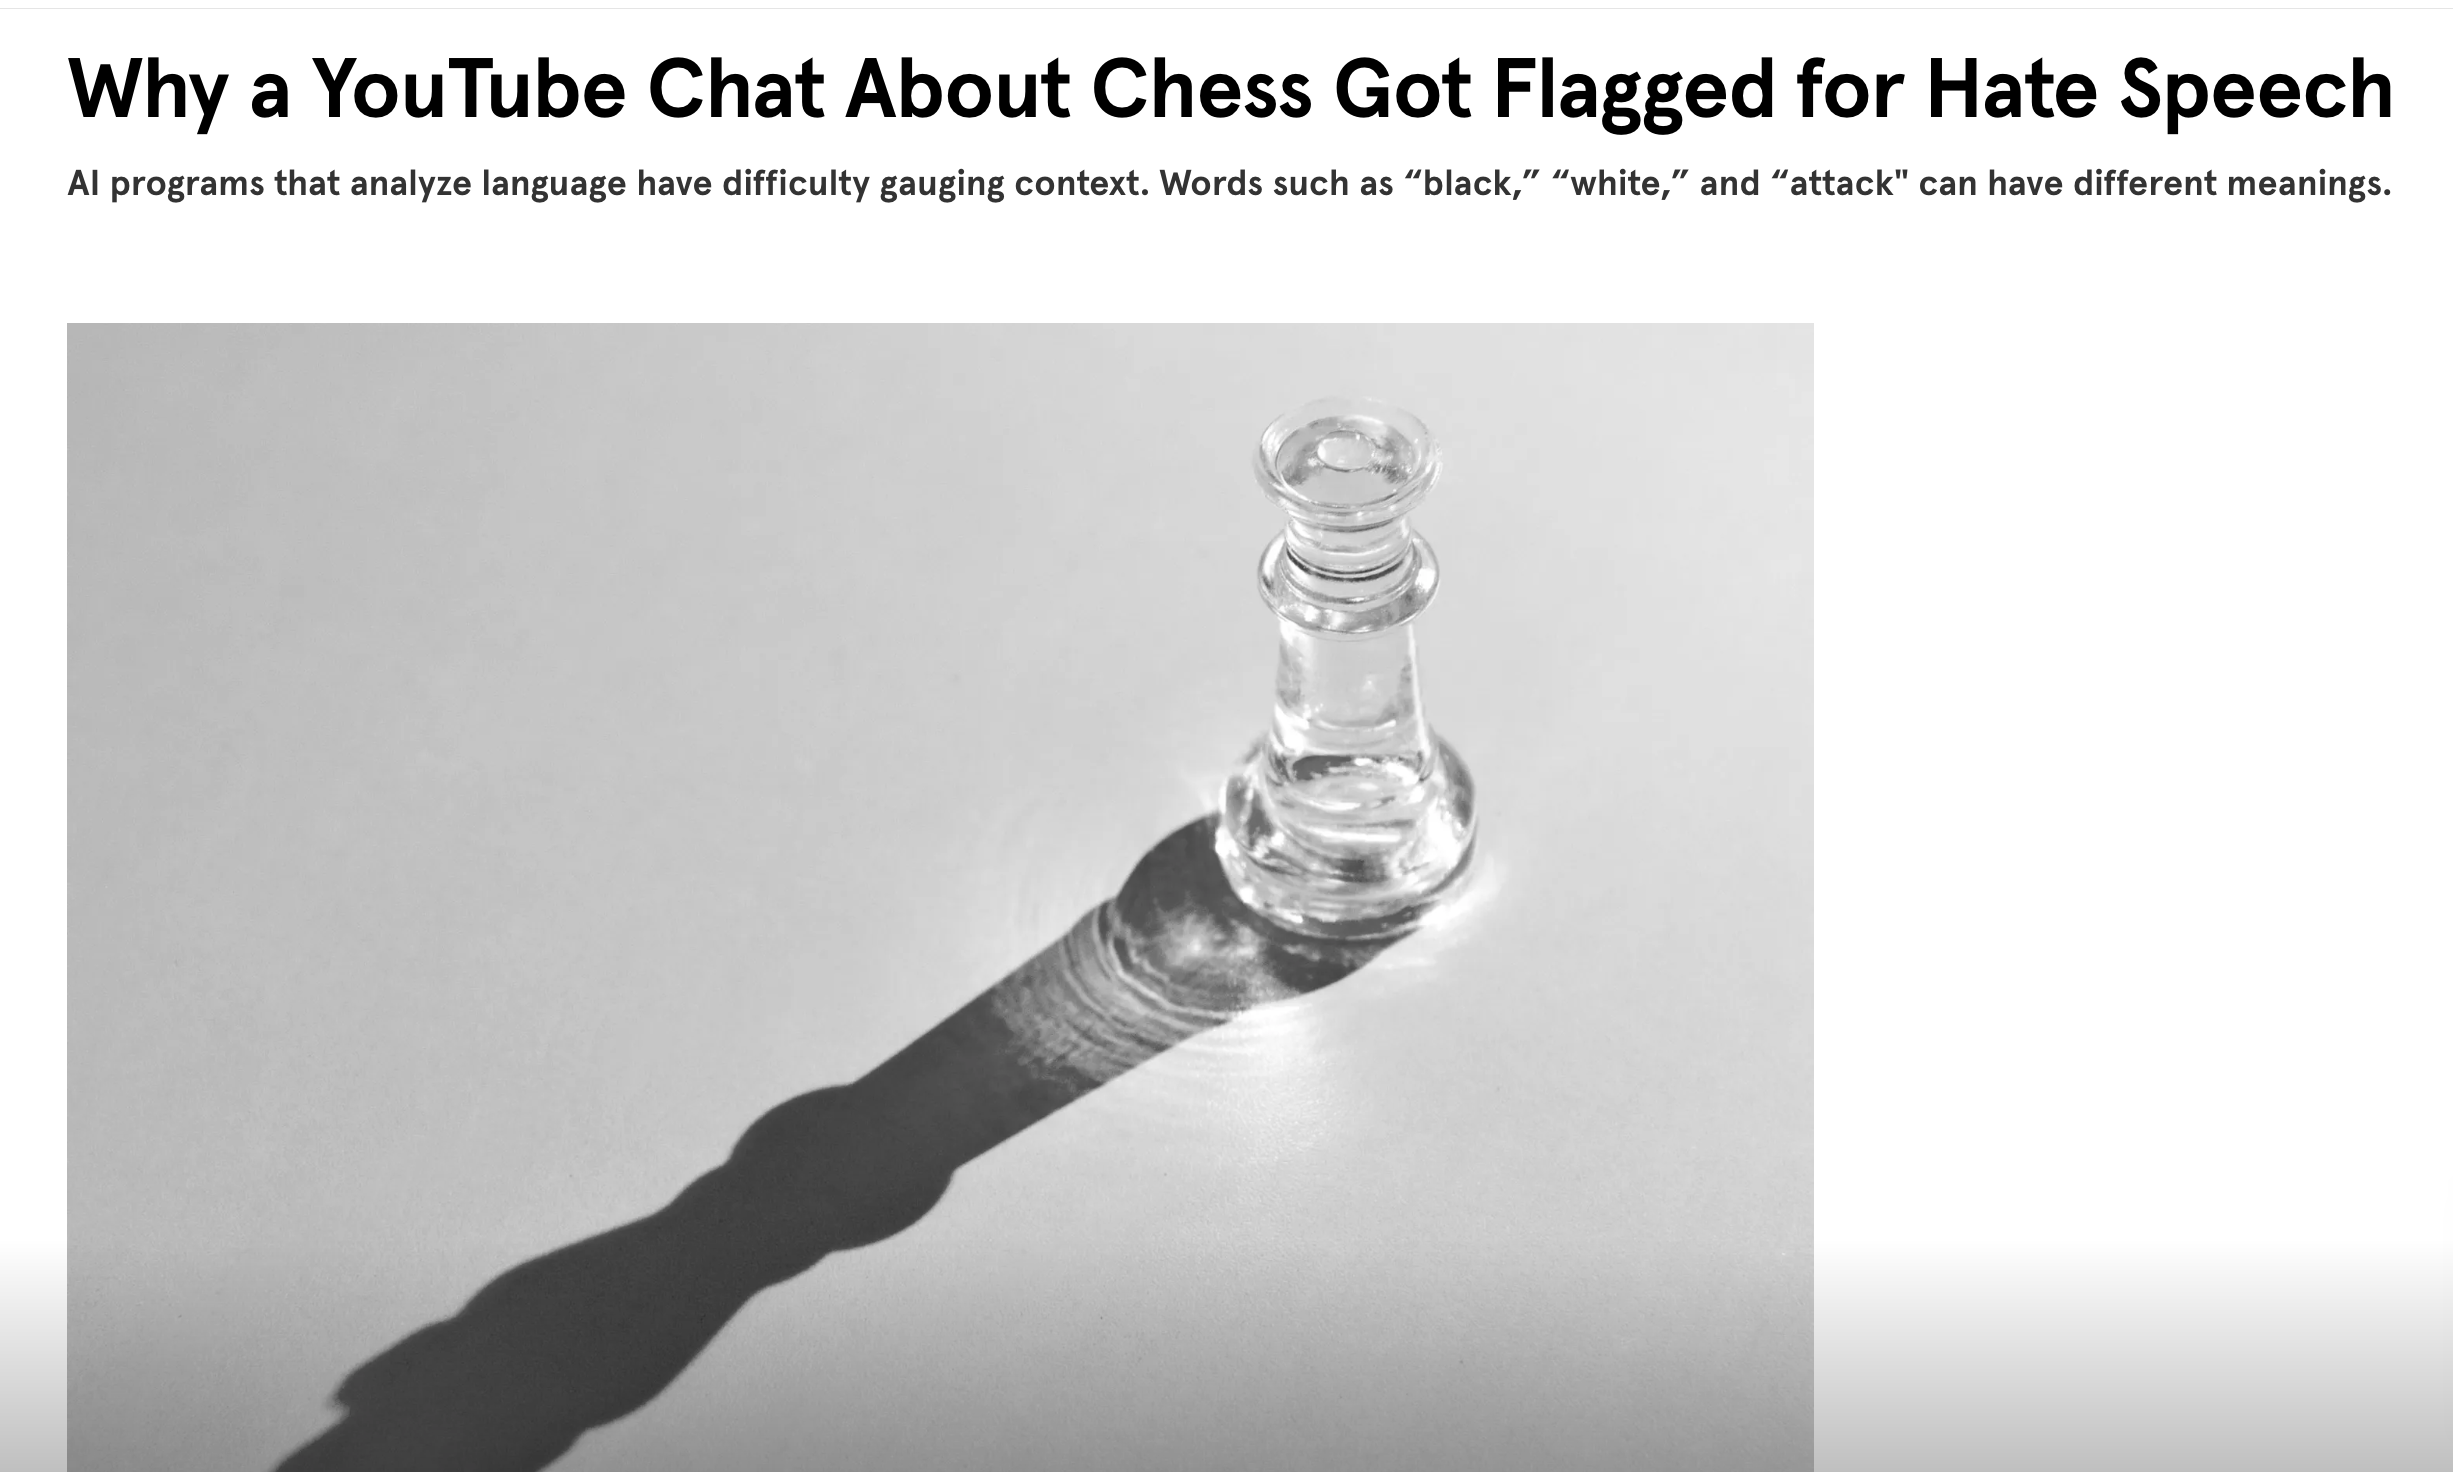 Youtube Chat About Chess flagged for hate speech